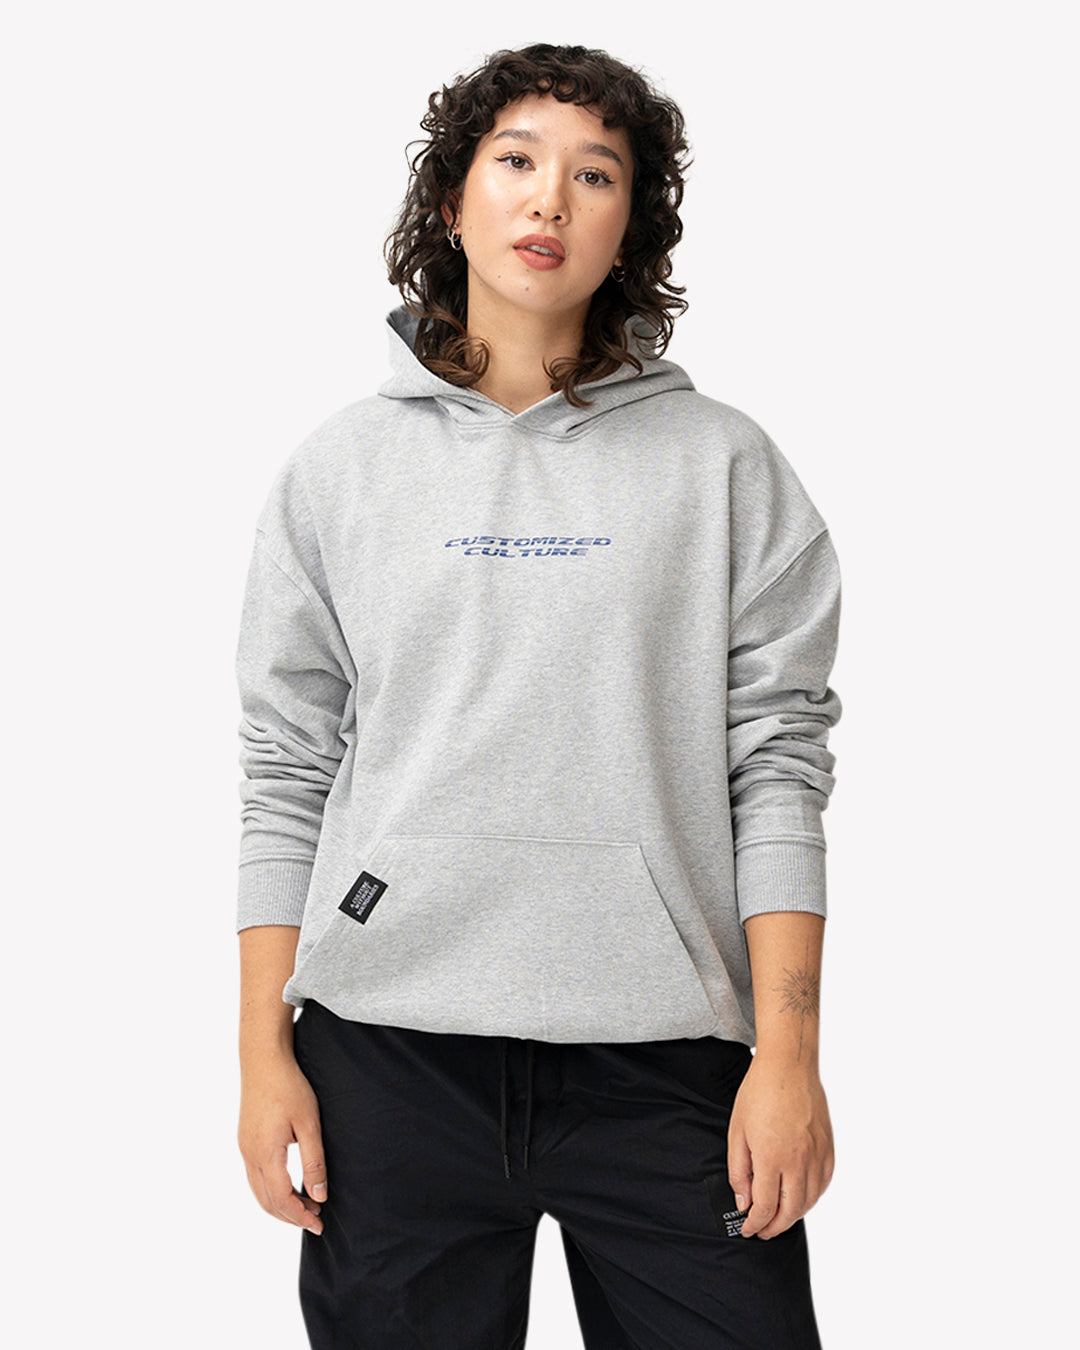 Healed or Distracted Hoodie Grey | Customized Culture